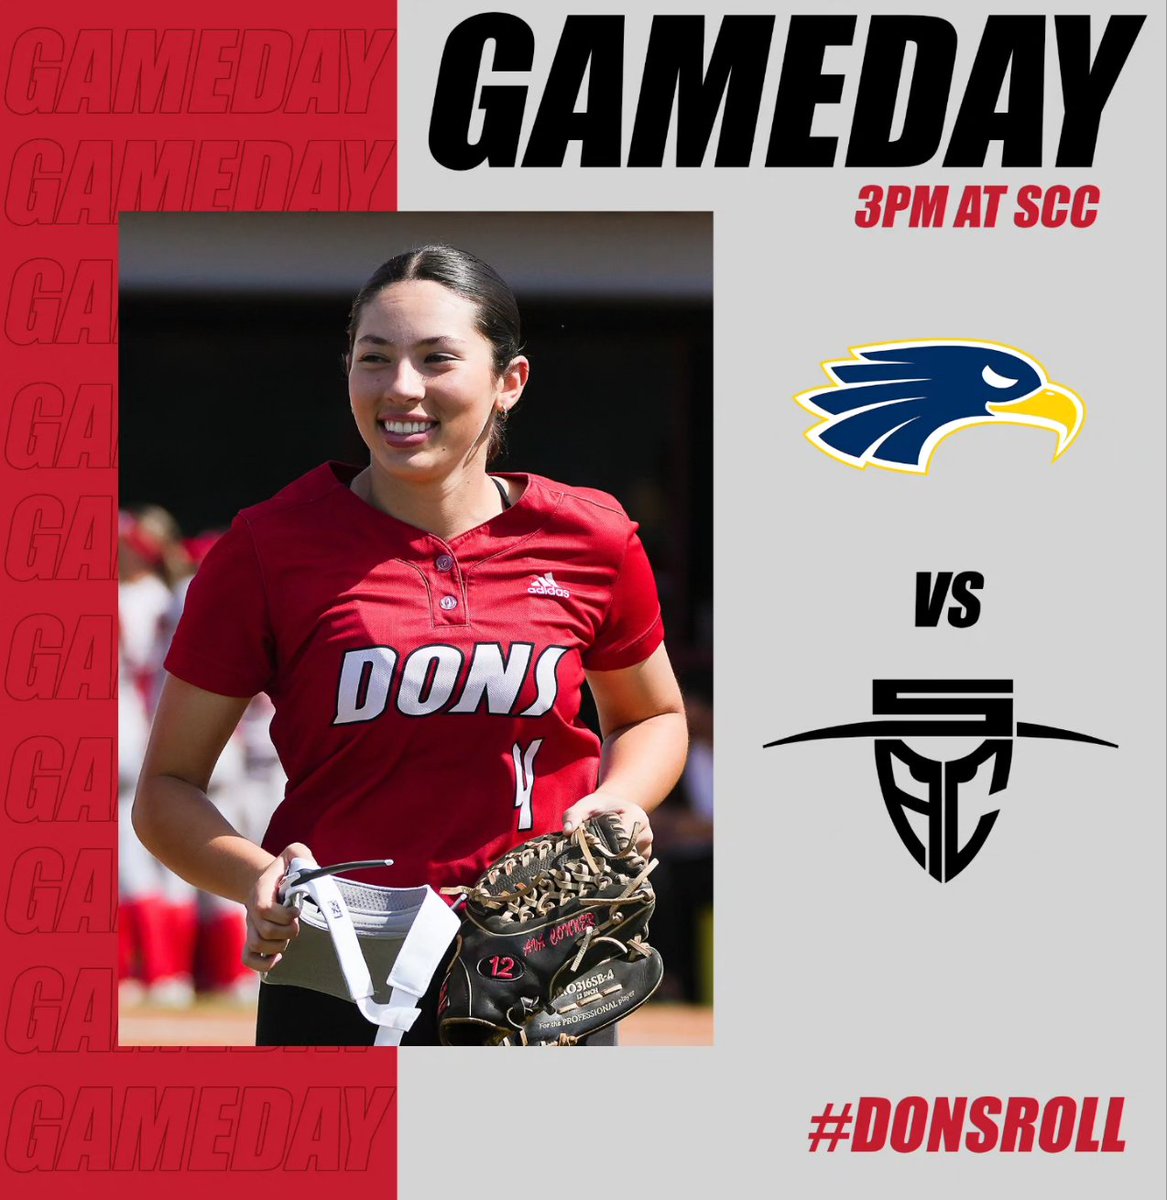 GAMEDAY BSB 🆚️ Irvine Valley 🕑 2PM 📍SAC SFT 🆚️ Santiago Canyon 🕒 3PM 📍SCC #DonsRoll